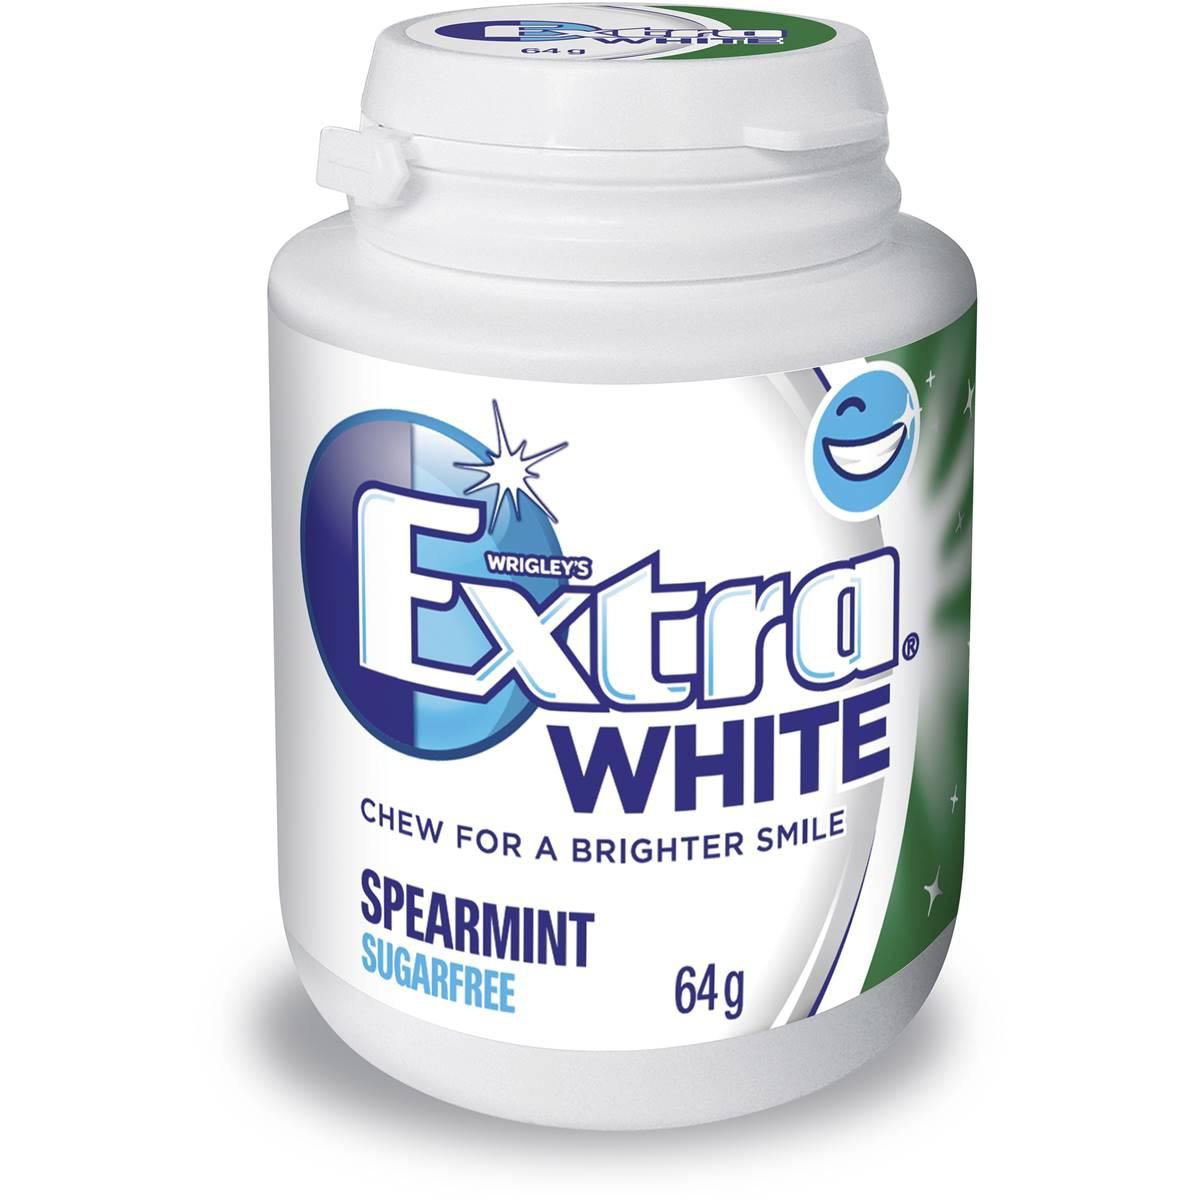 Extra White Spearmint Sugar Free Chewing Gum Bottle 64g